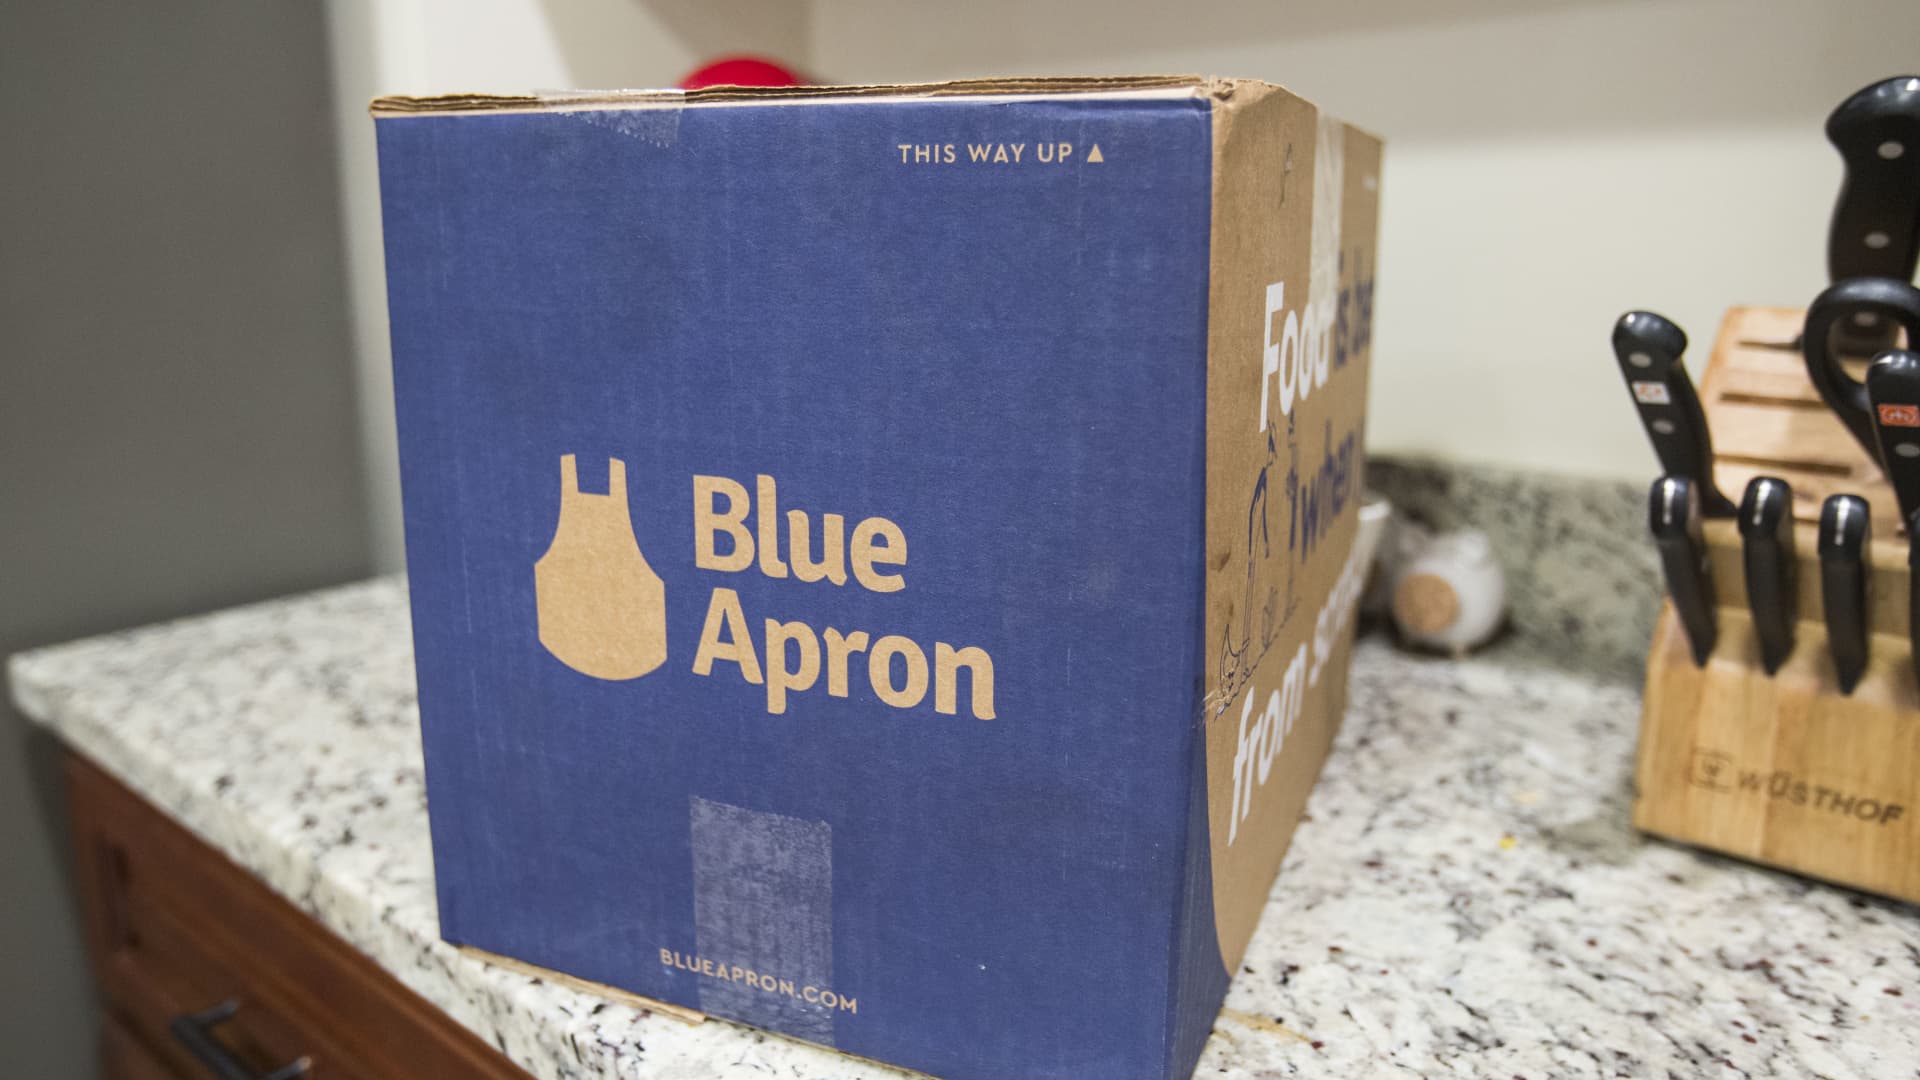 Blue Apron to be acquired by Wonder Group for $103 million, capping tumultuous post-IPO ride